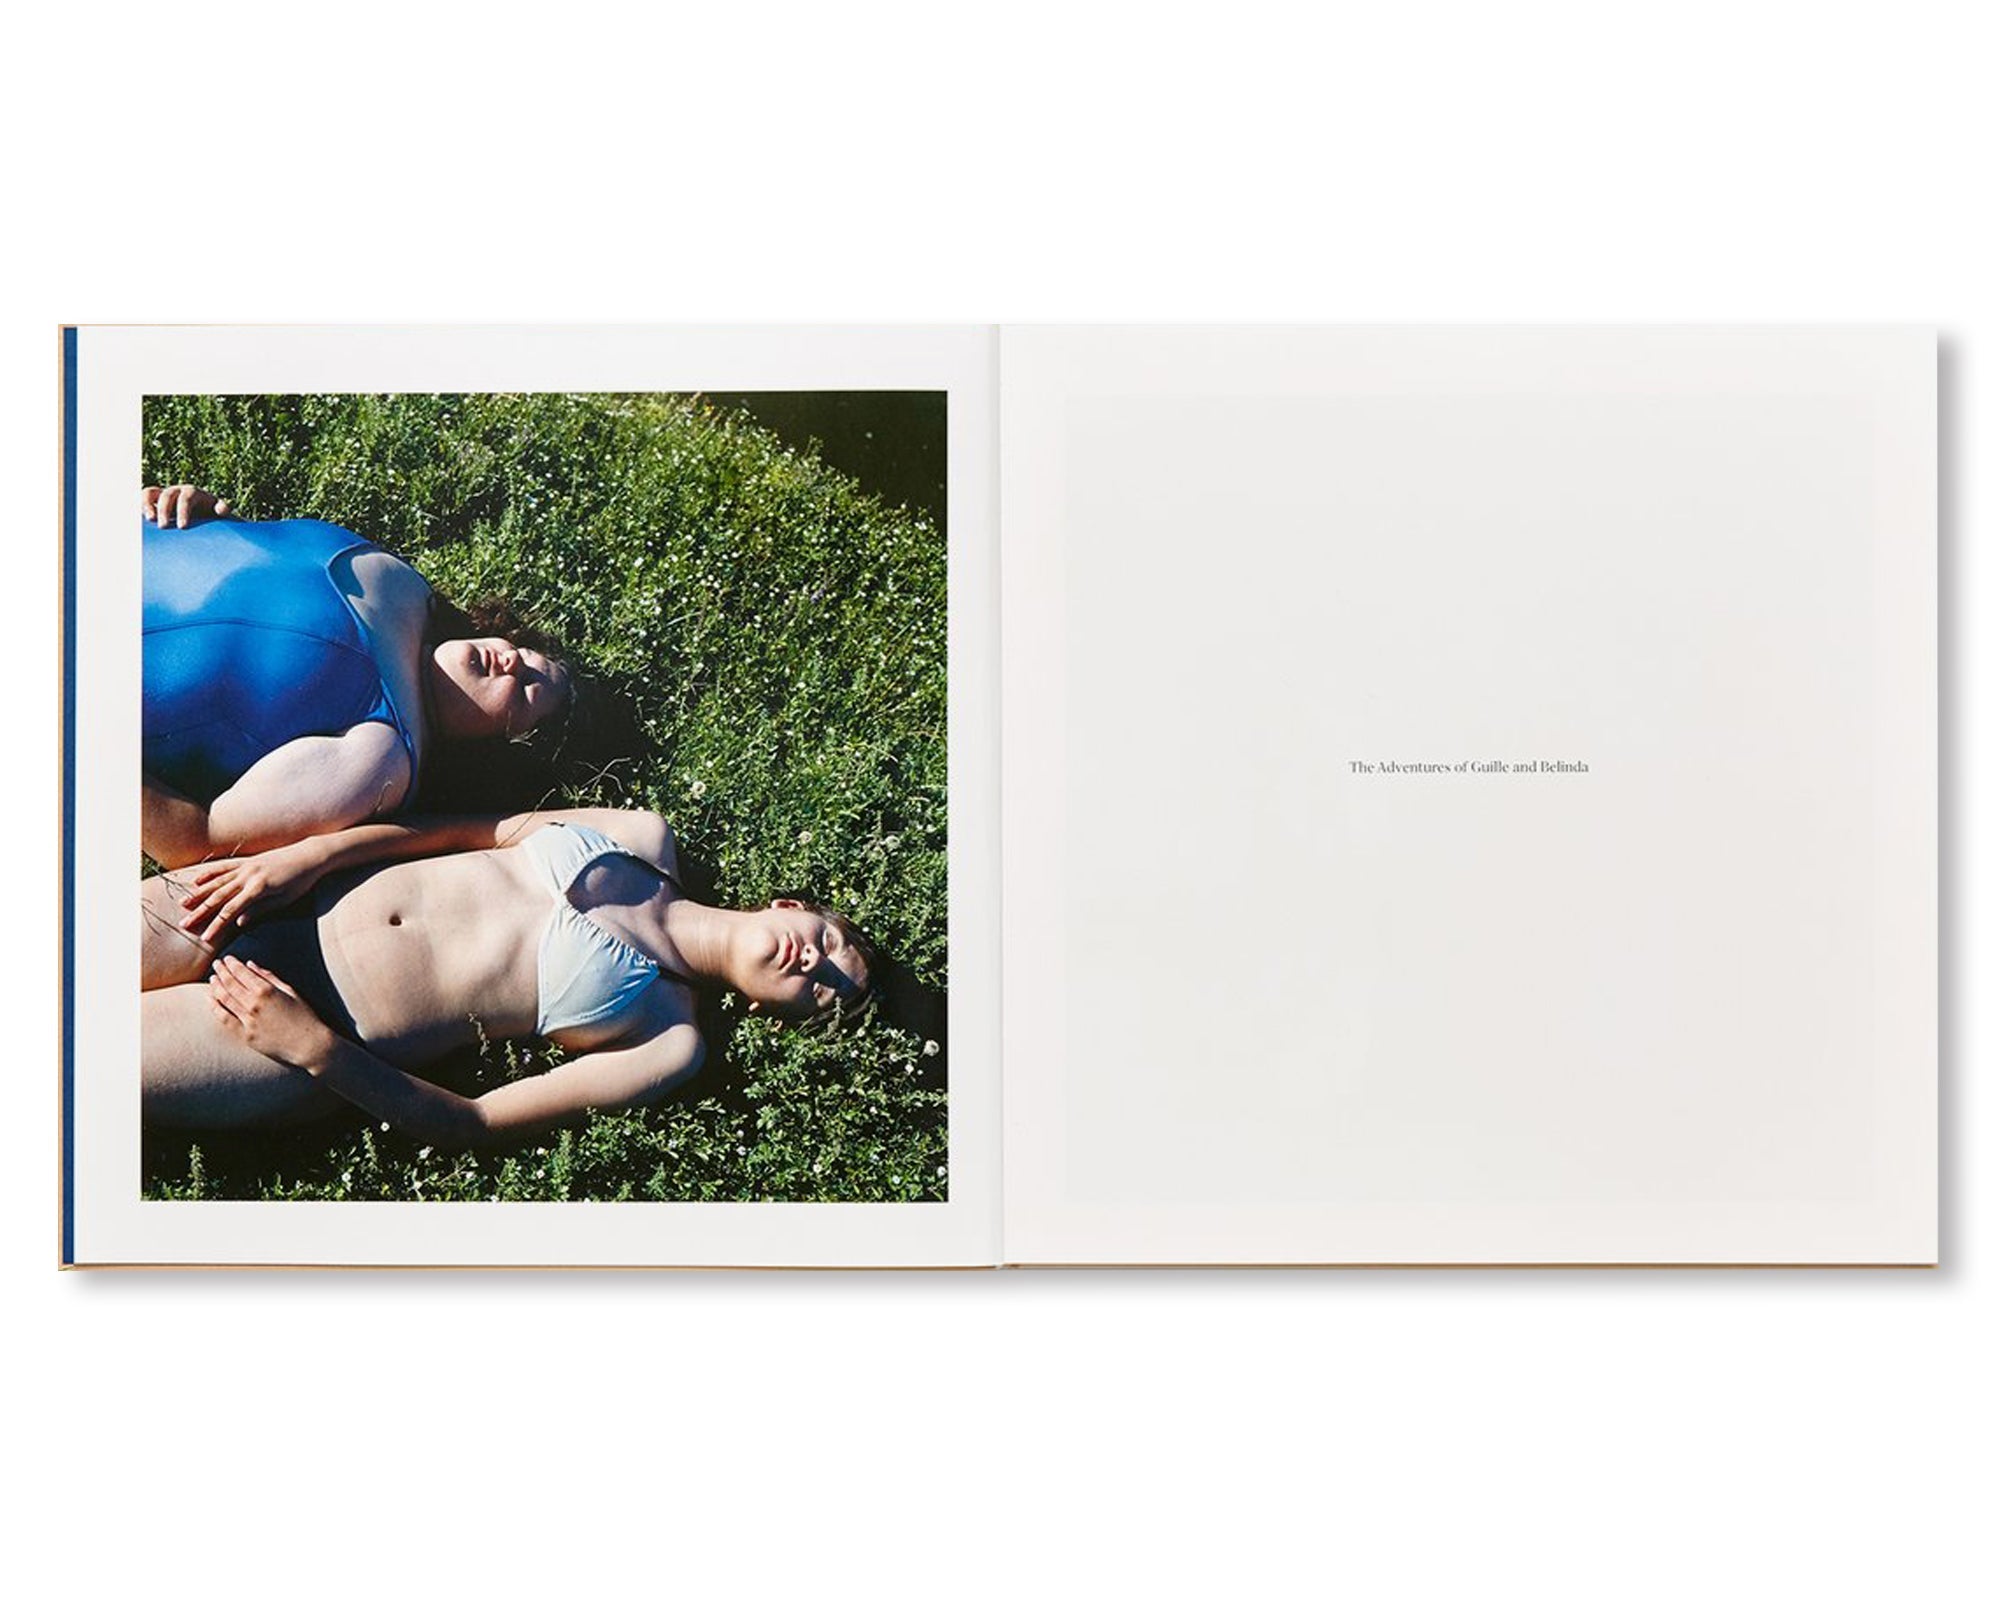 THE ADVENTURES OF GUILLE AND BELINDA AND THE ILLUSION OF AN EVERLASTING SUMMER by Alessandra Sanguinetti [DIRECT SIGNED]